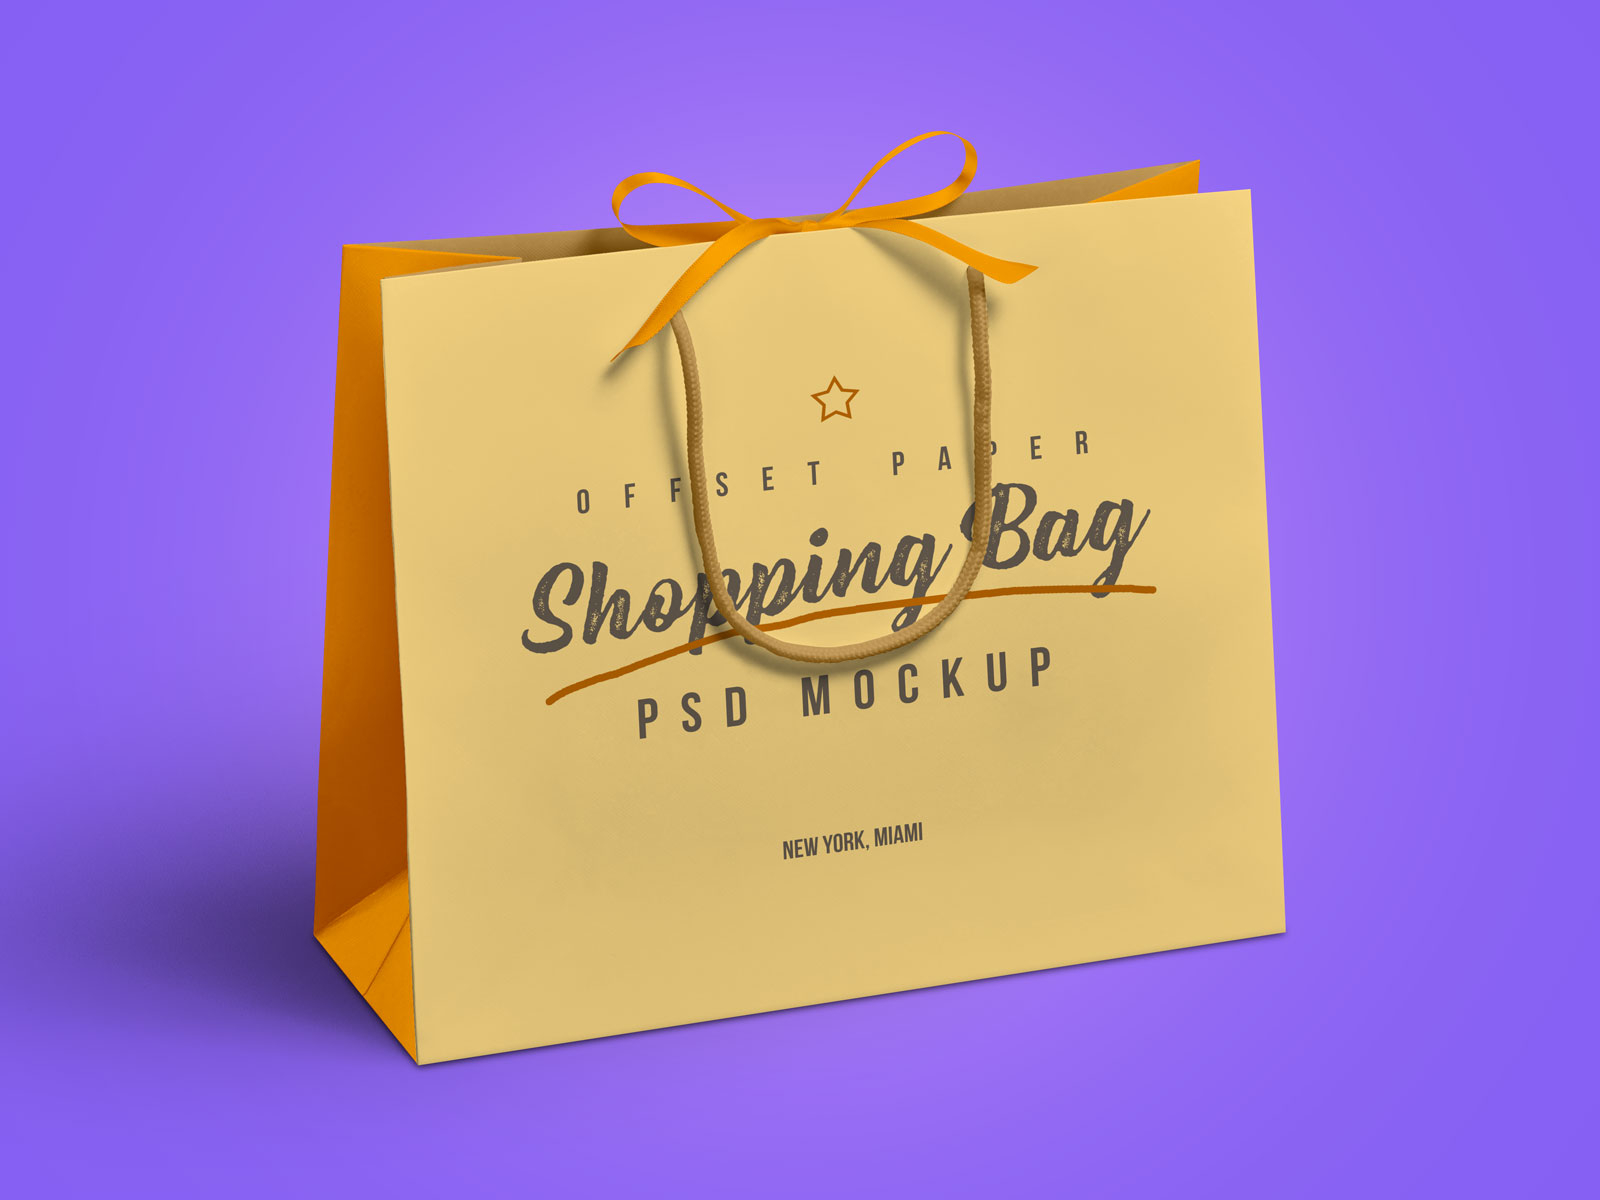 Download Free Grocery Shopping Bag Mockup PSD by Zee Que | Designbolts on Dribbble